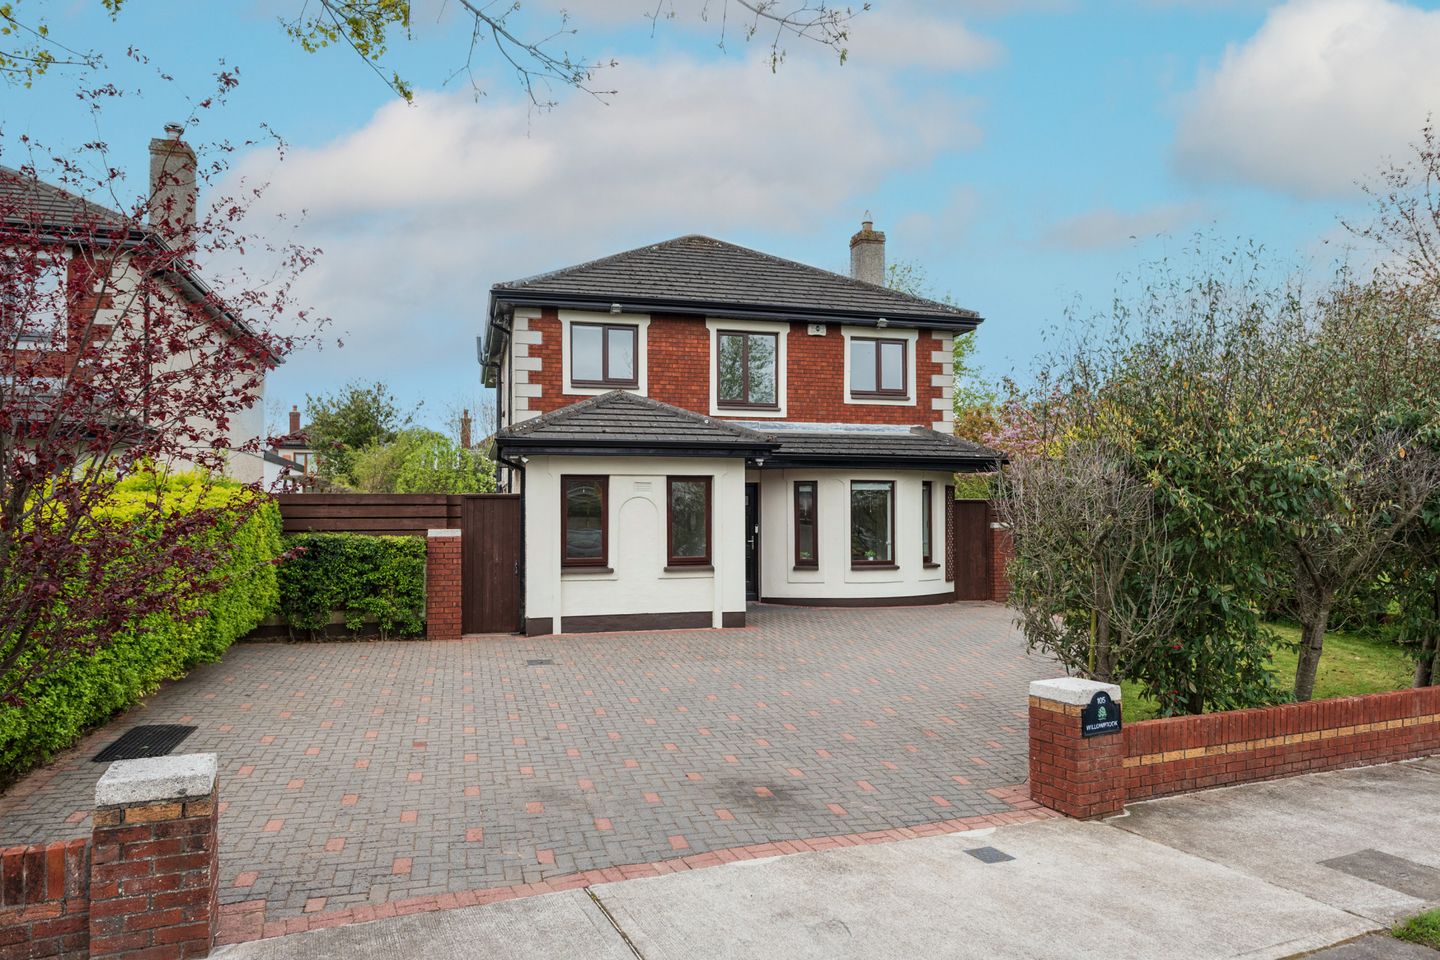 Willowbrook, 105 The Park,, Sallins Road,, Naas,, Co. Kildare, W91WK4D